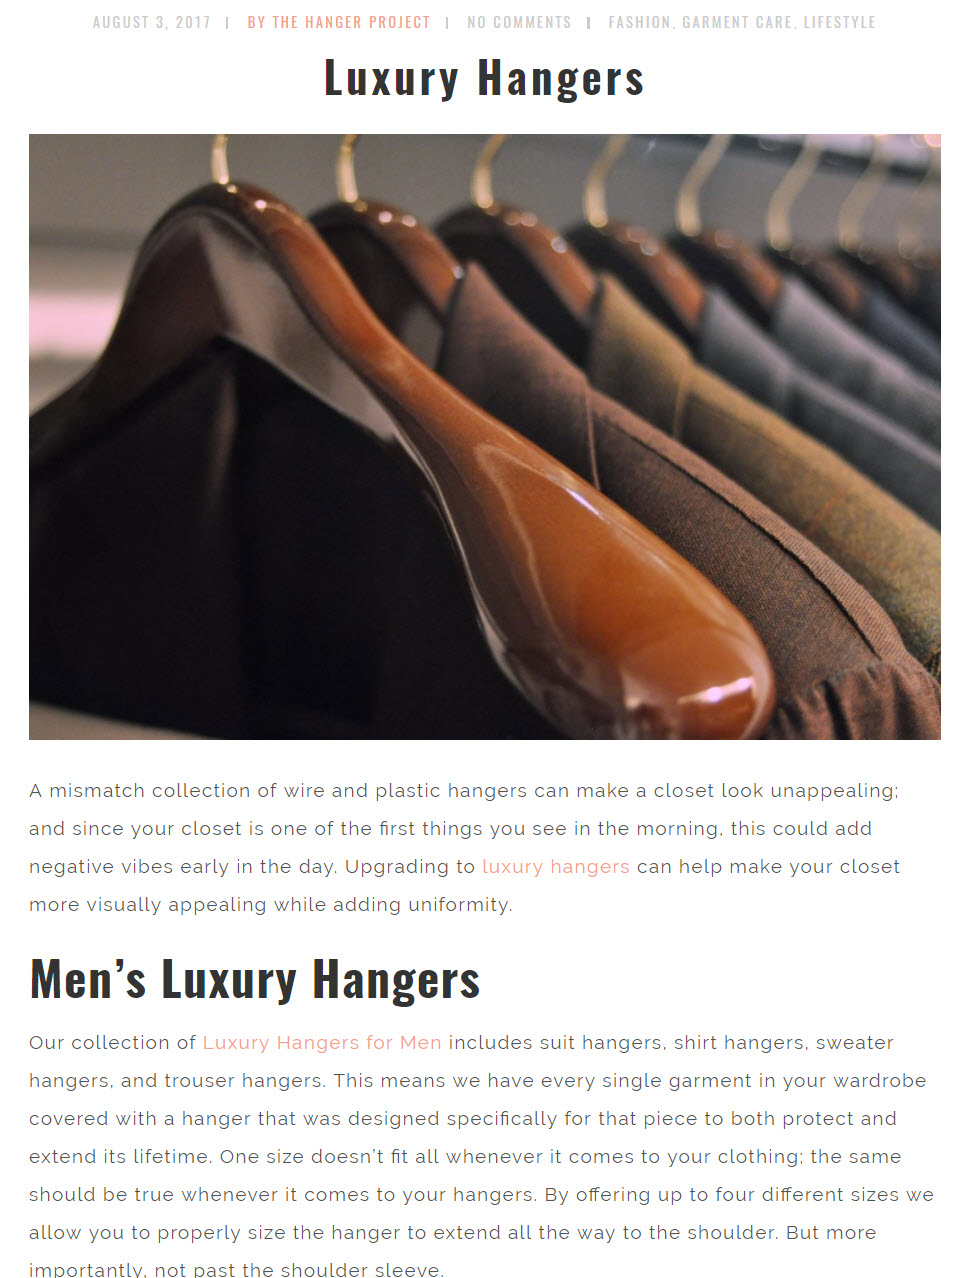 The Hanger Project Blog links in a controlled way to relevant product categories.